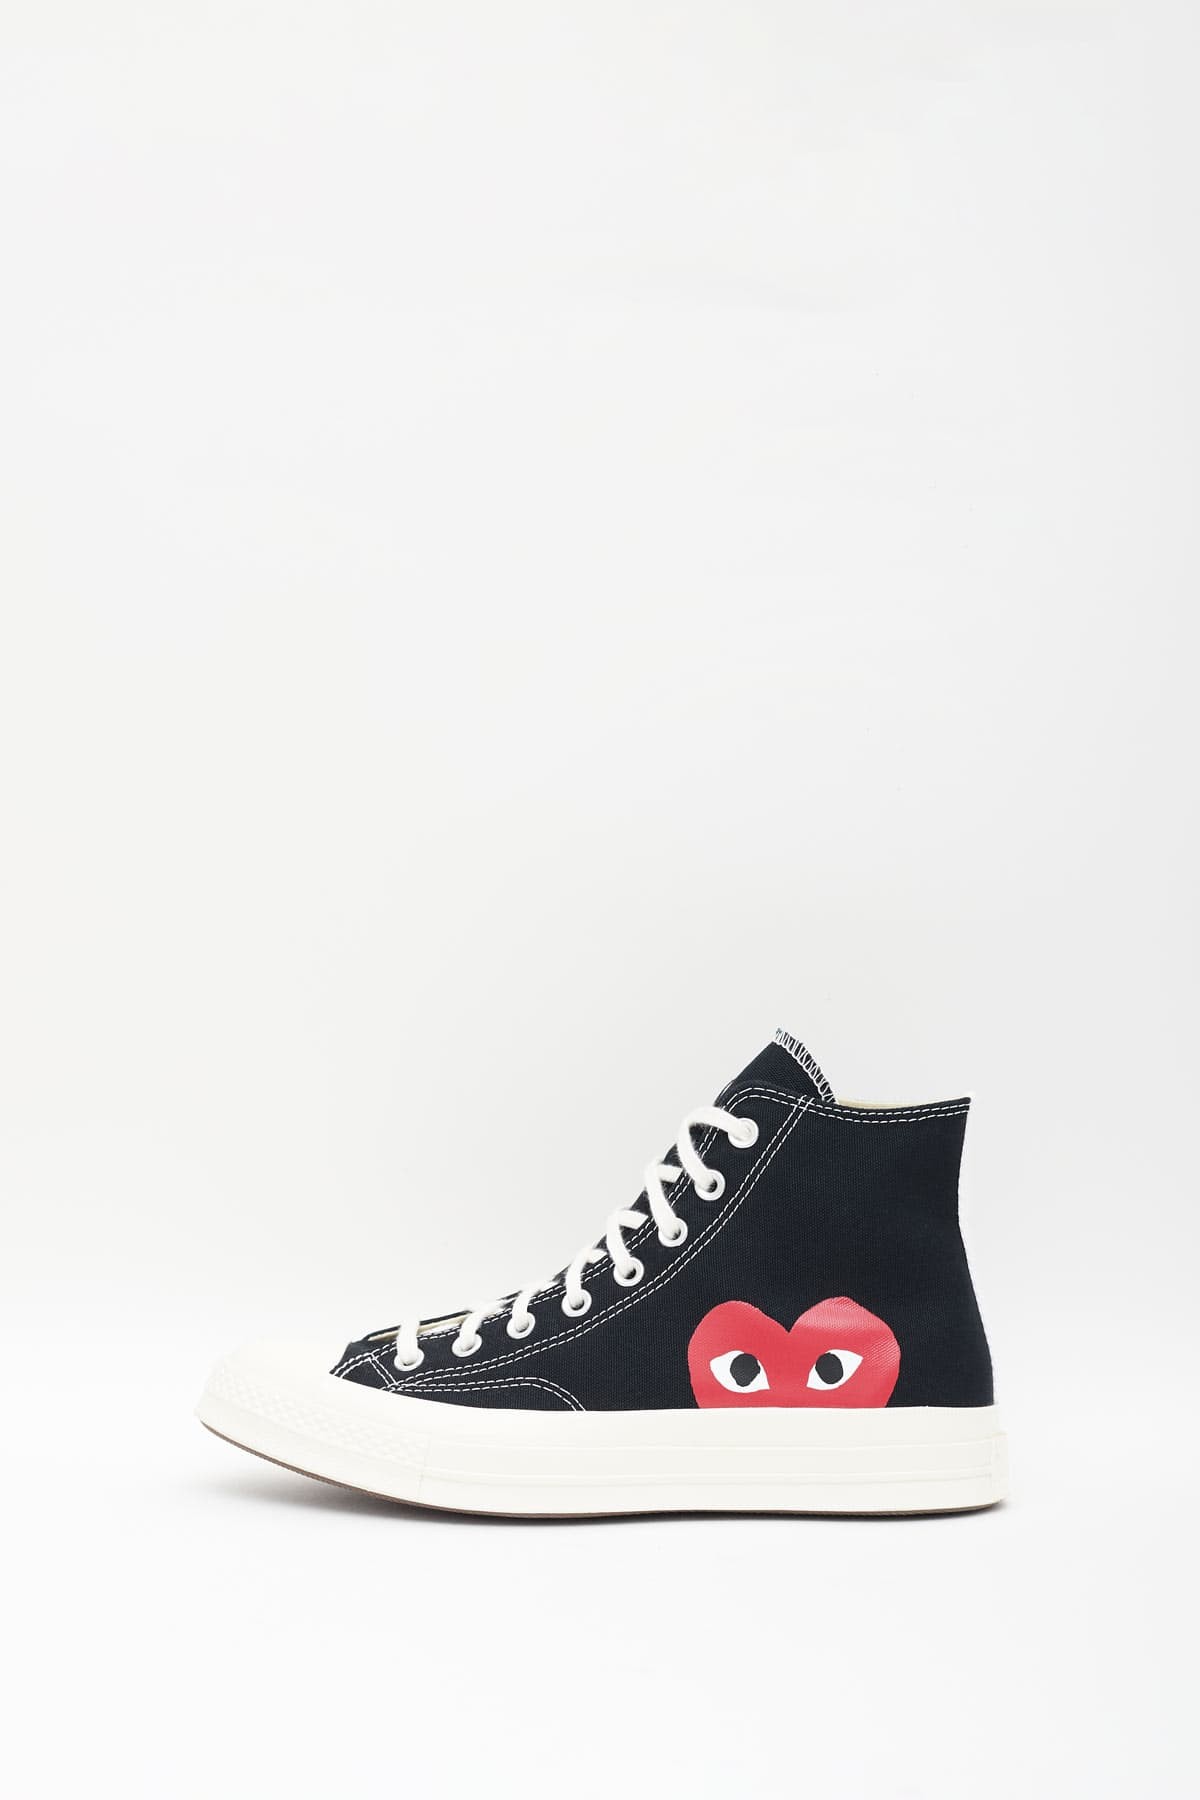 COMME DES GARCONS PLAY CONVERSE BLACK CHUCK TAYLOR 70 HIGH SNEAKERS IAMNUE